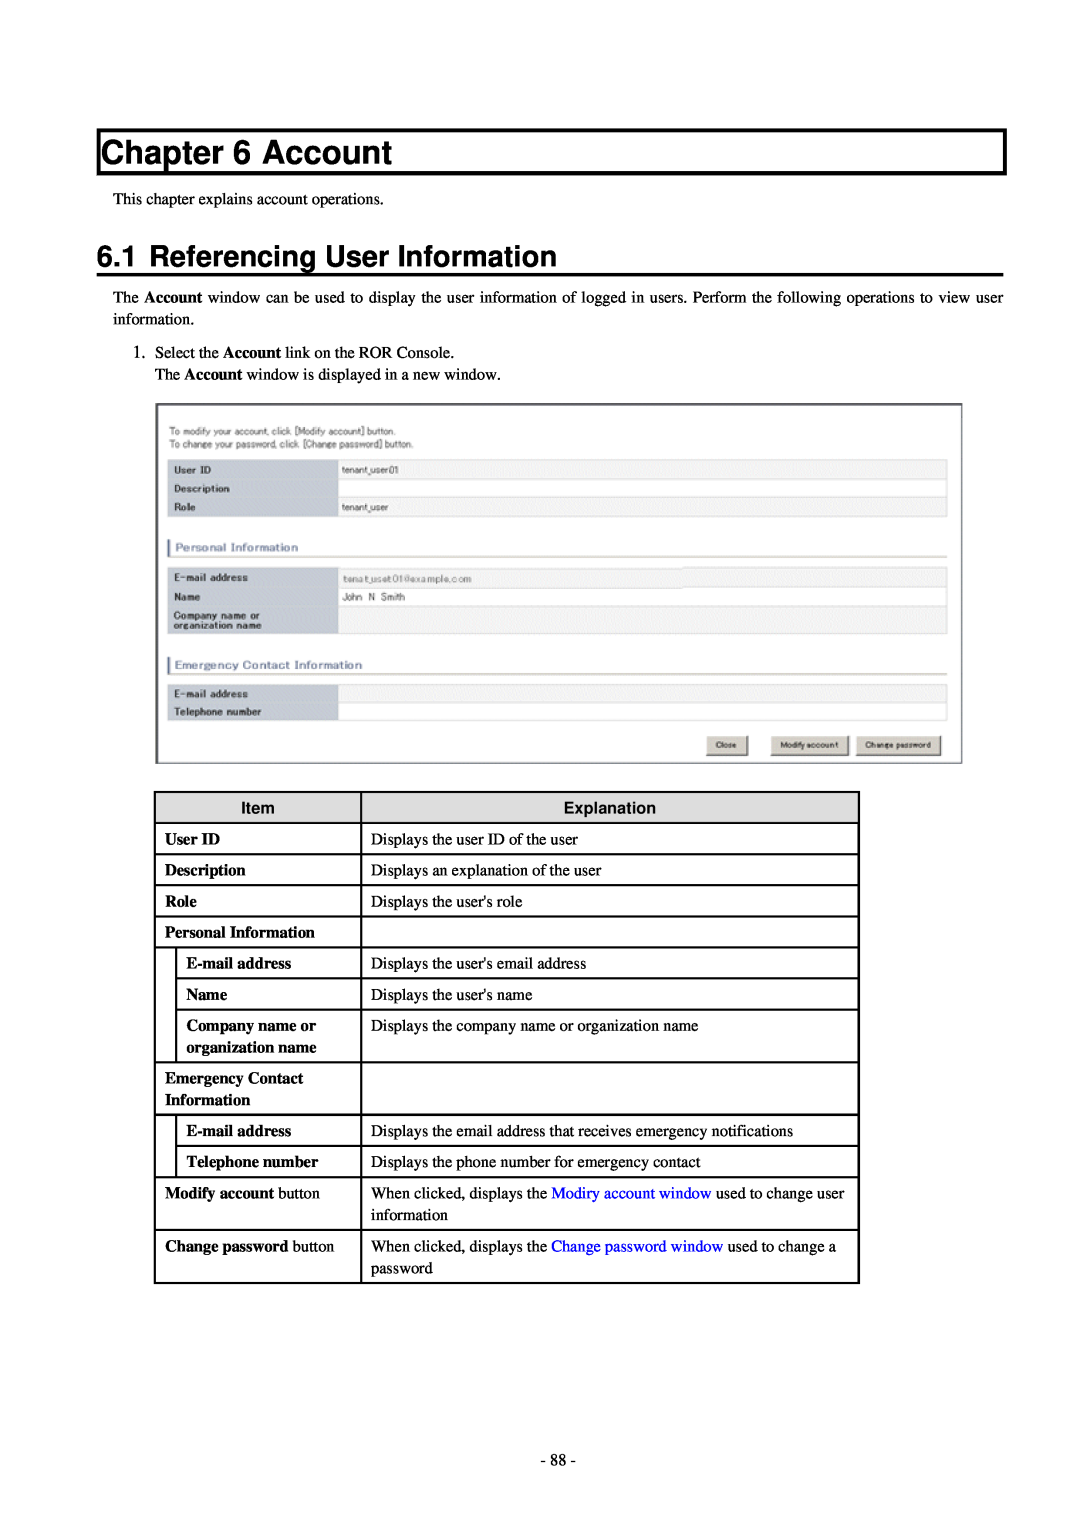 Fujitsu V3.0.0 Account, Referencing User Information, Explanation, User ID, Displays the user ID of the user, Description 